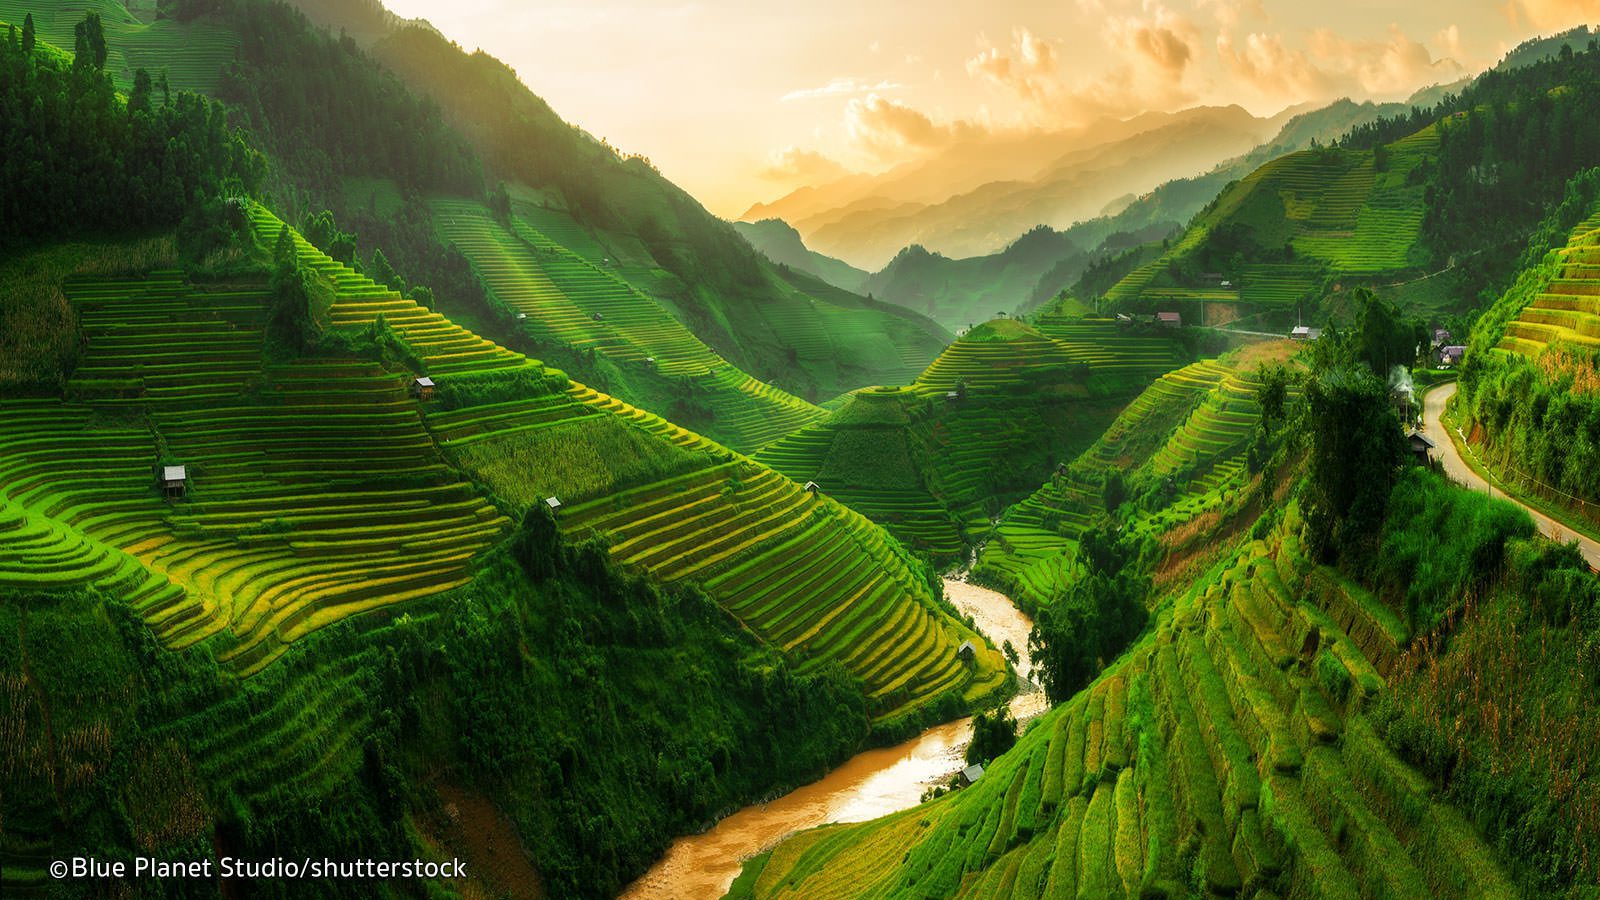 The tiered rice terraces in Sapa